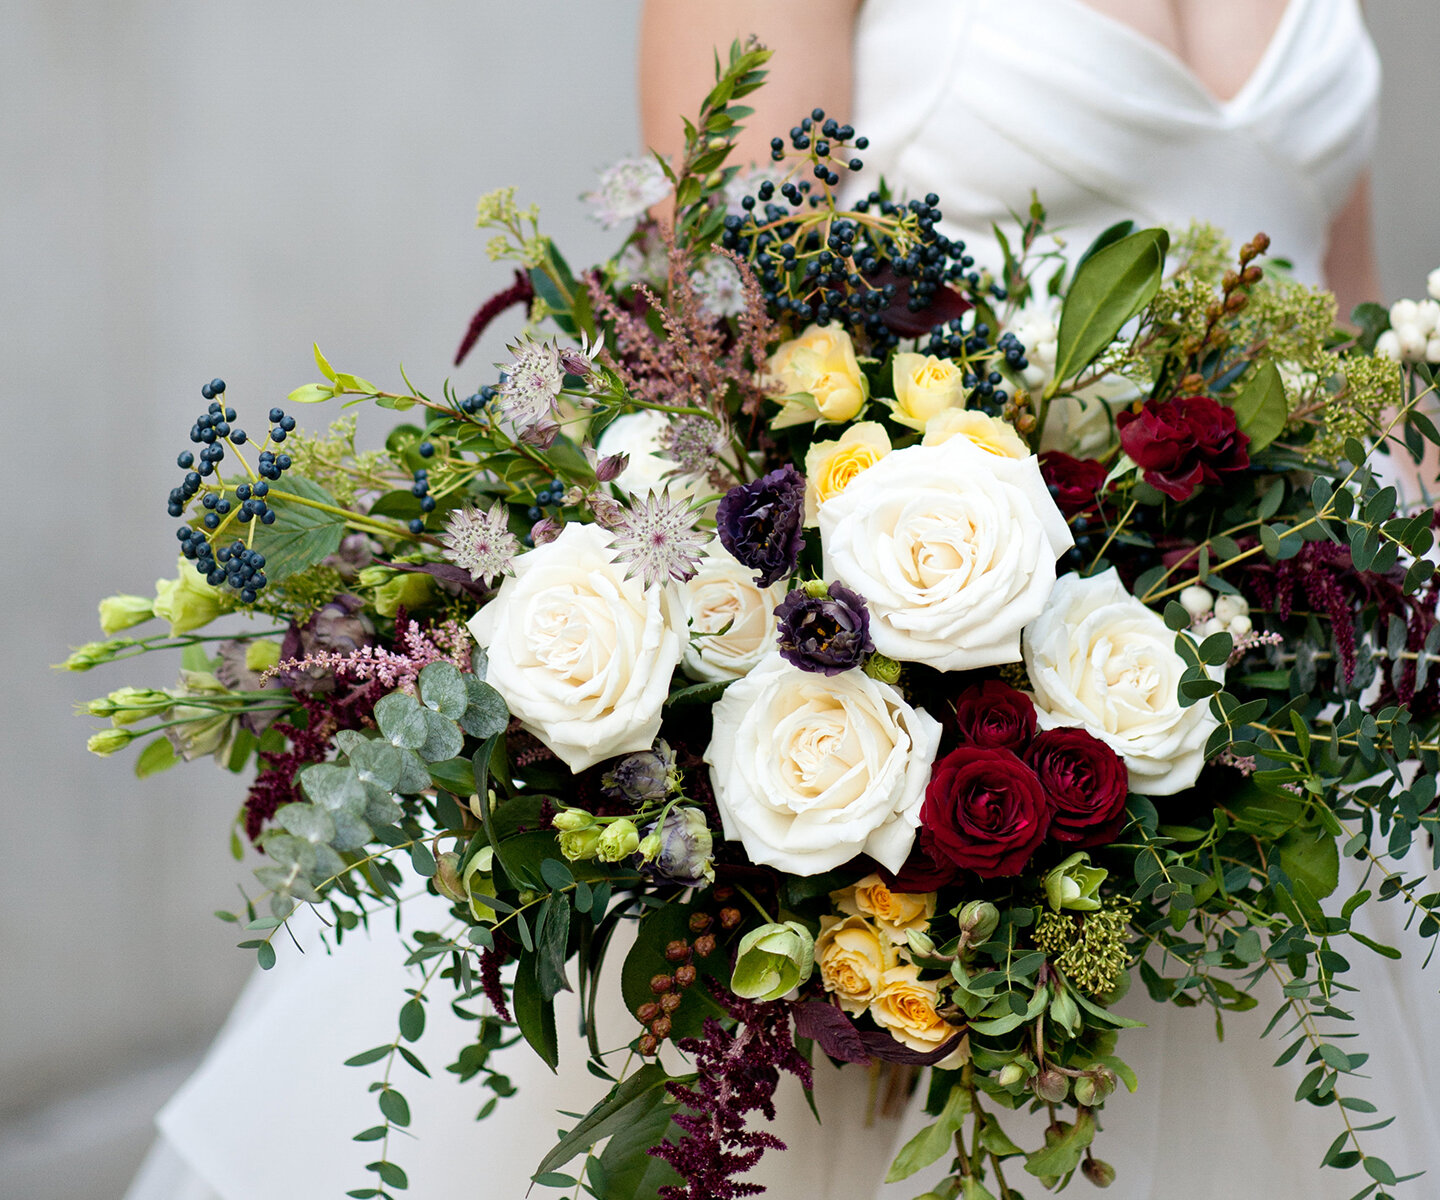 Bridal Bouquet Inspiration for Winter: 18 of the Prettiest Bouquets For Every Winter Wedding Style